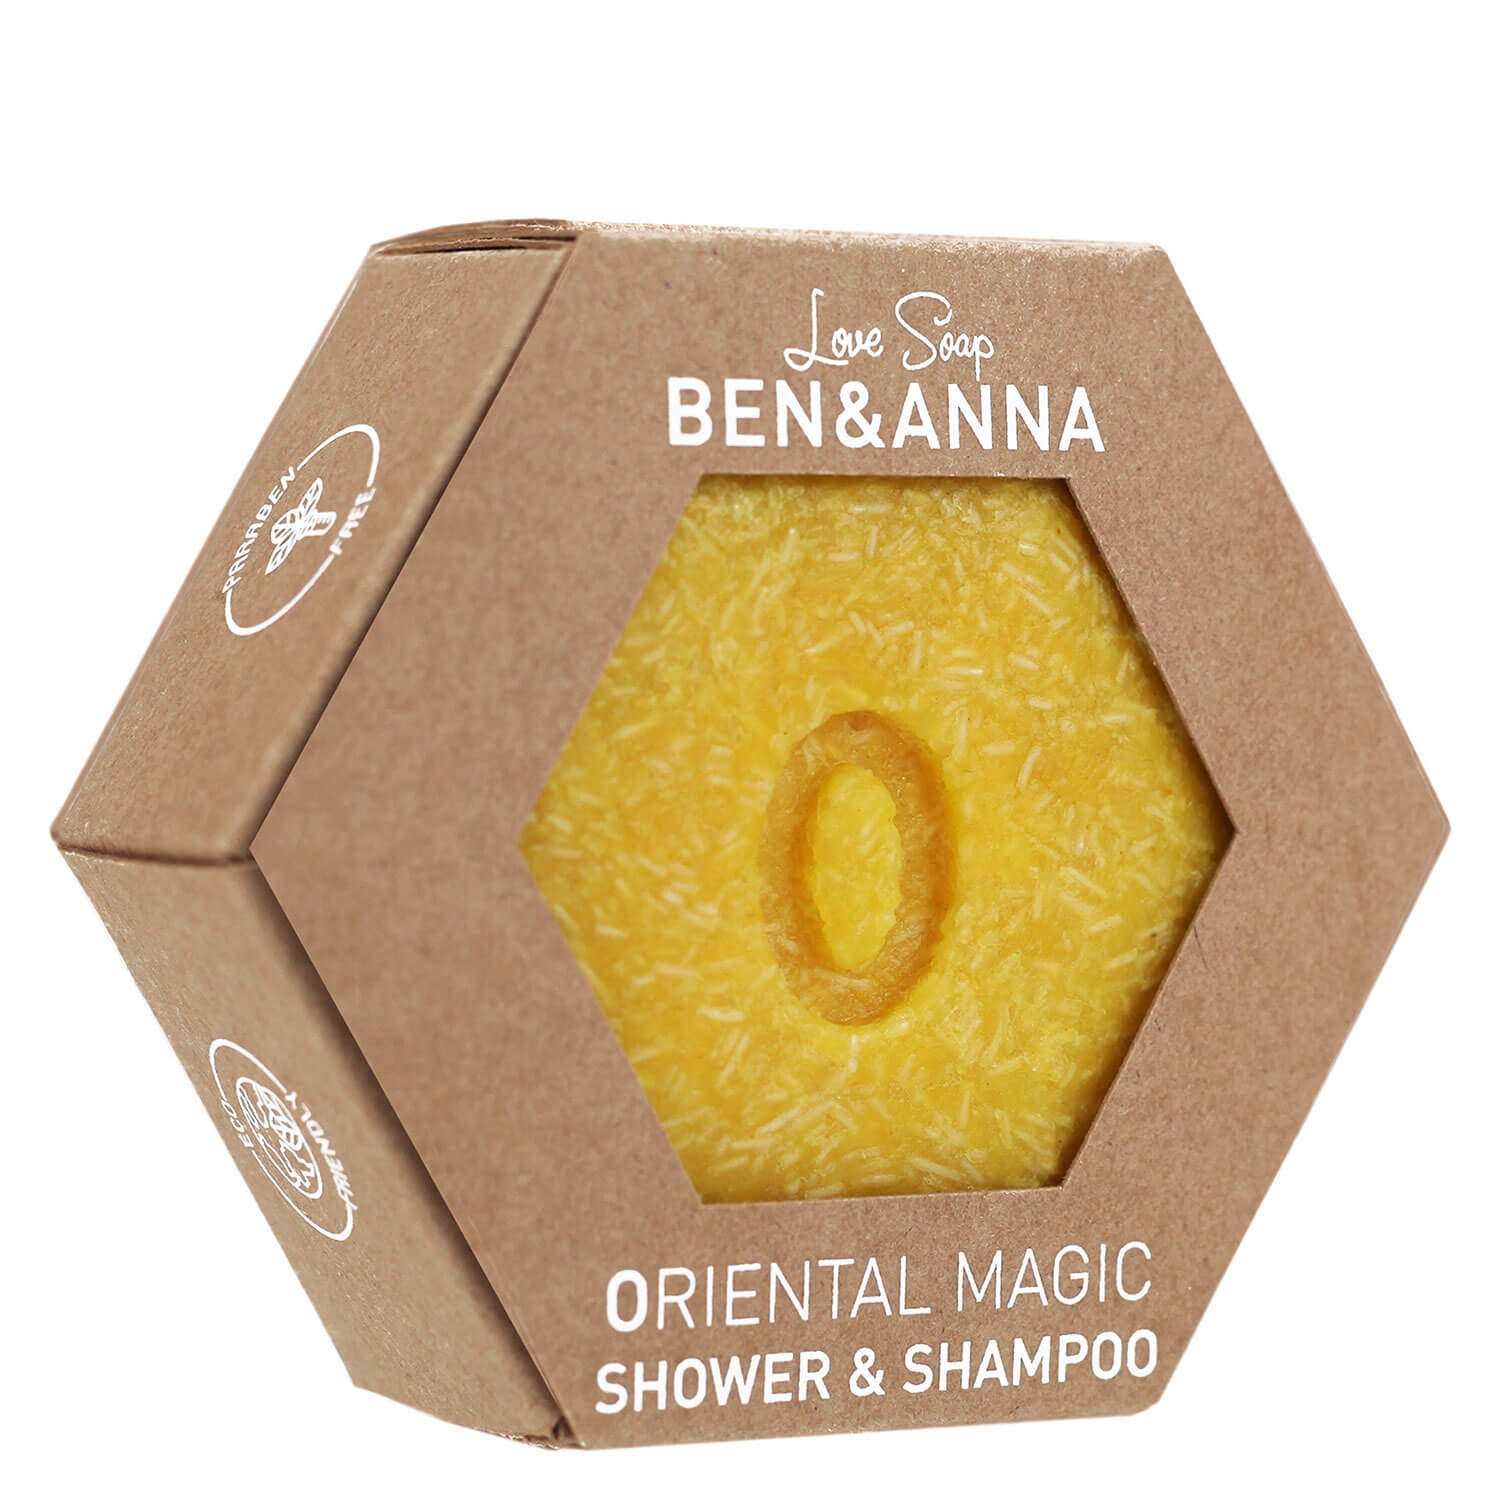 Product image from BEN&ANNA - Oriental Magic Shower & Shampoo